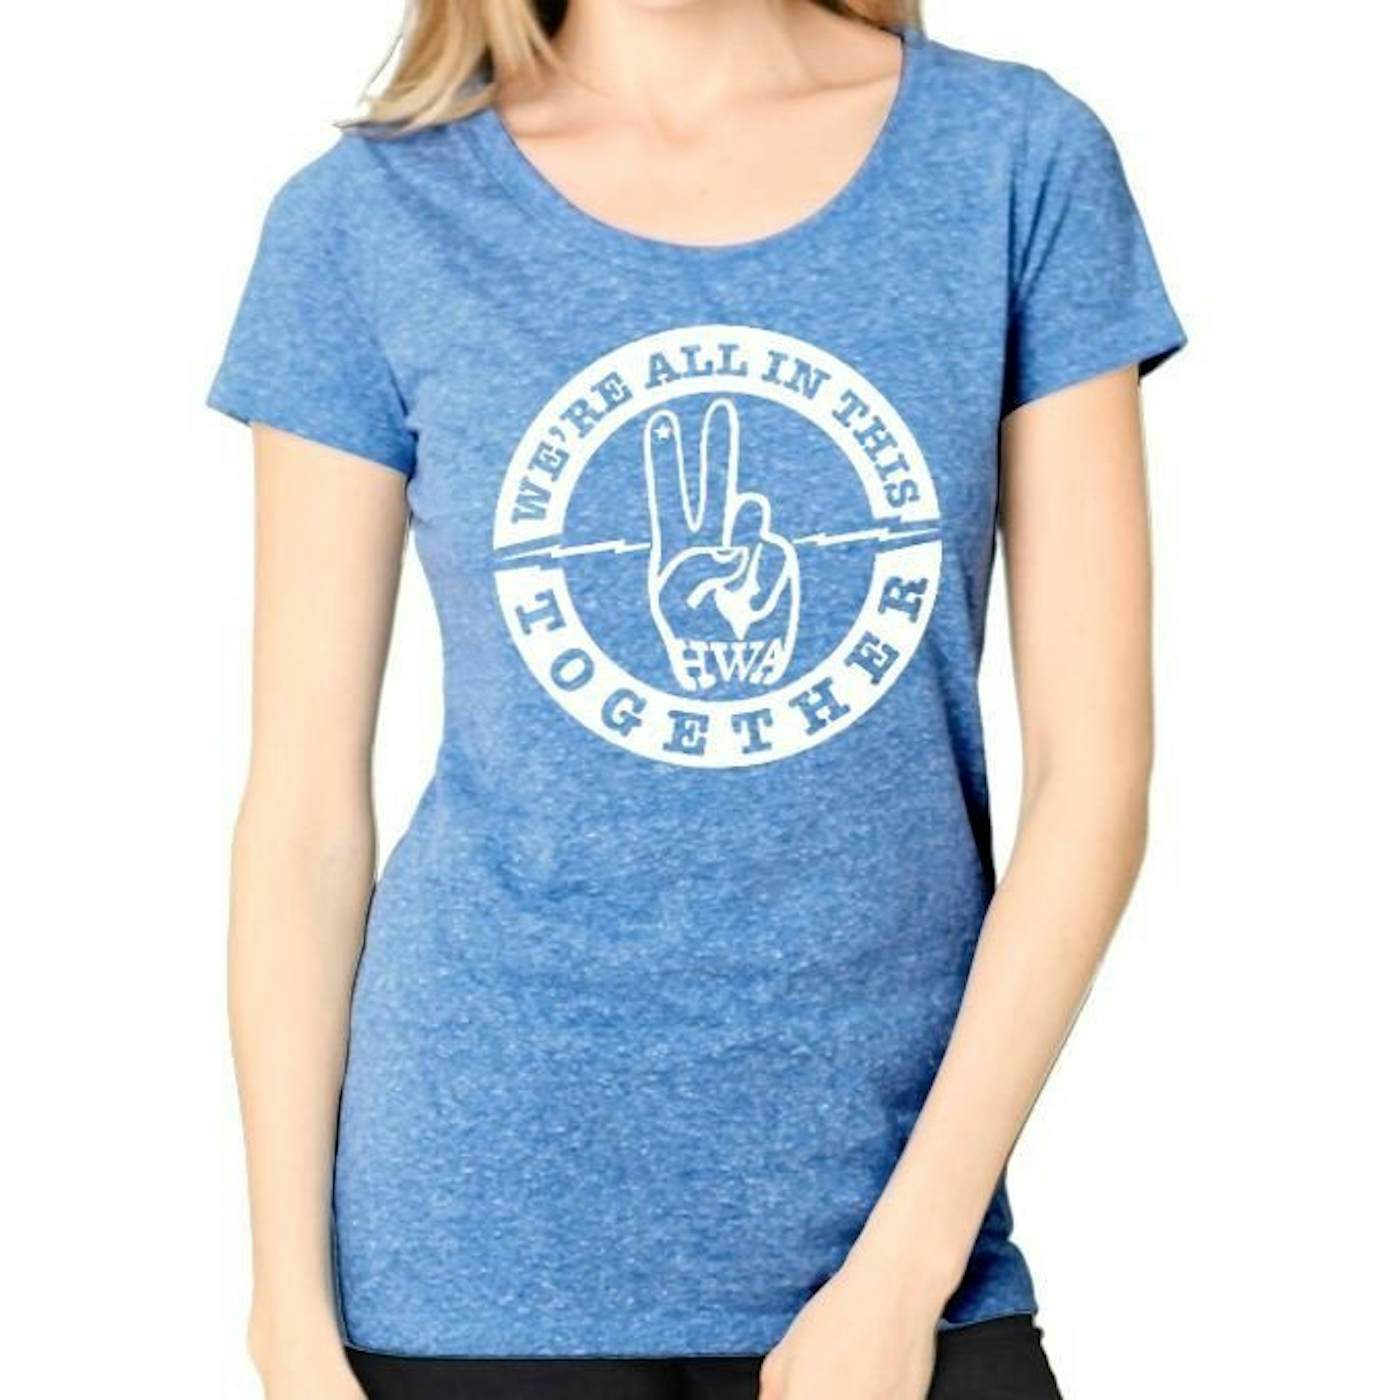 Hard Working Americans "We're All In This Together" Women's Tee